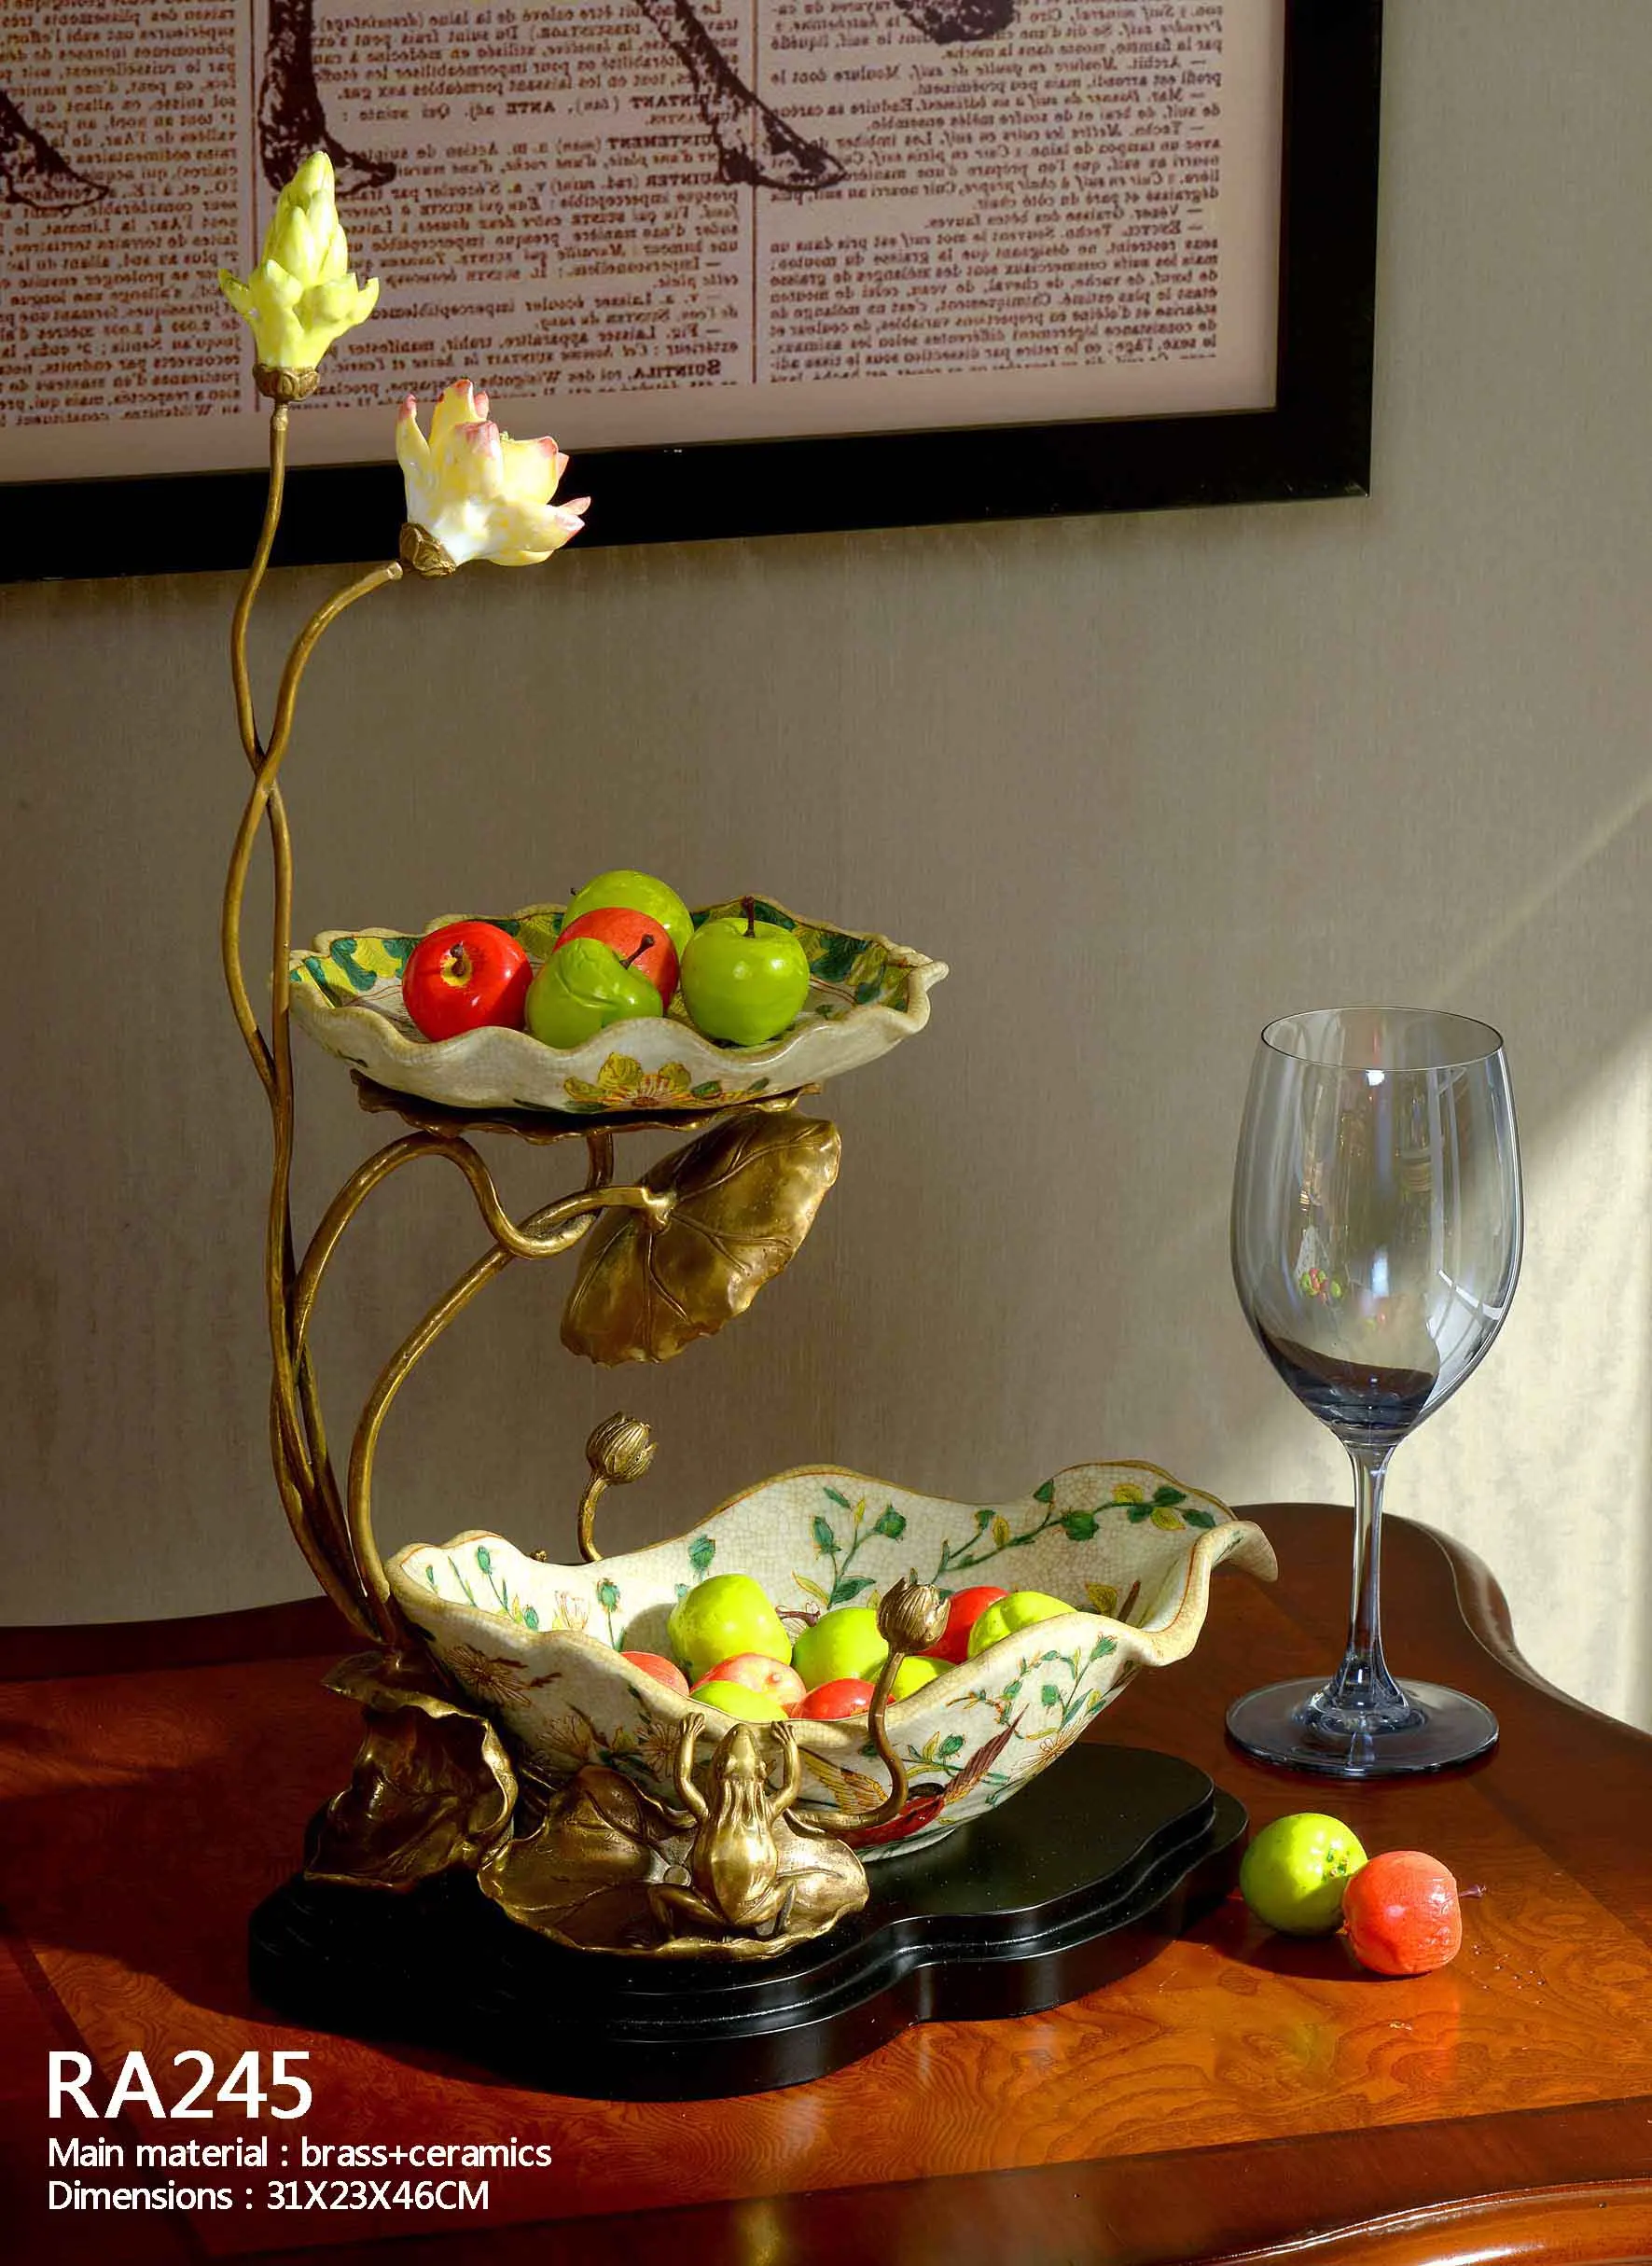 

European American ceramic with copper inlaid ceramic with copper inlaid double-layer dessert fruit tray